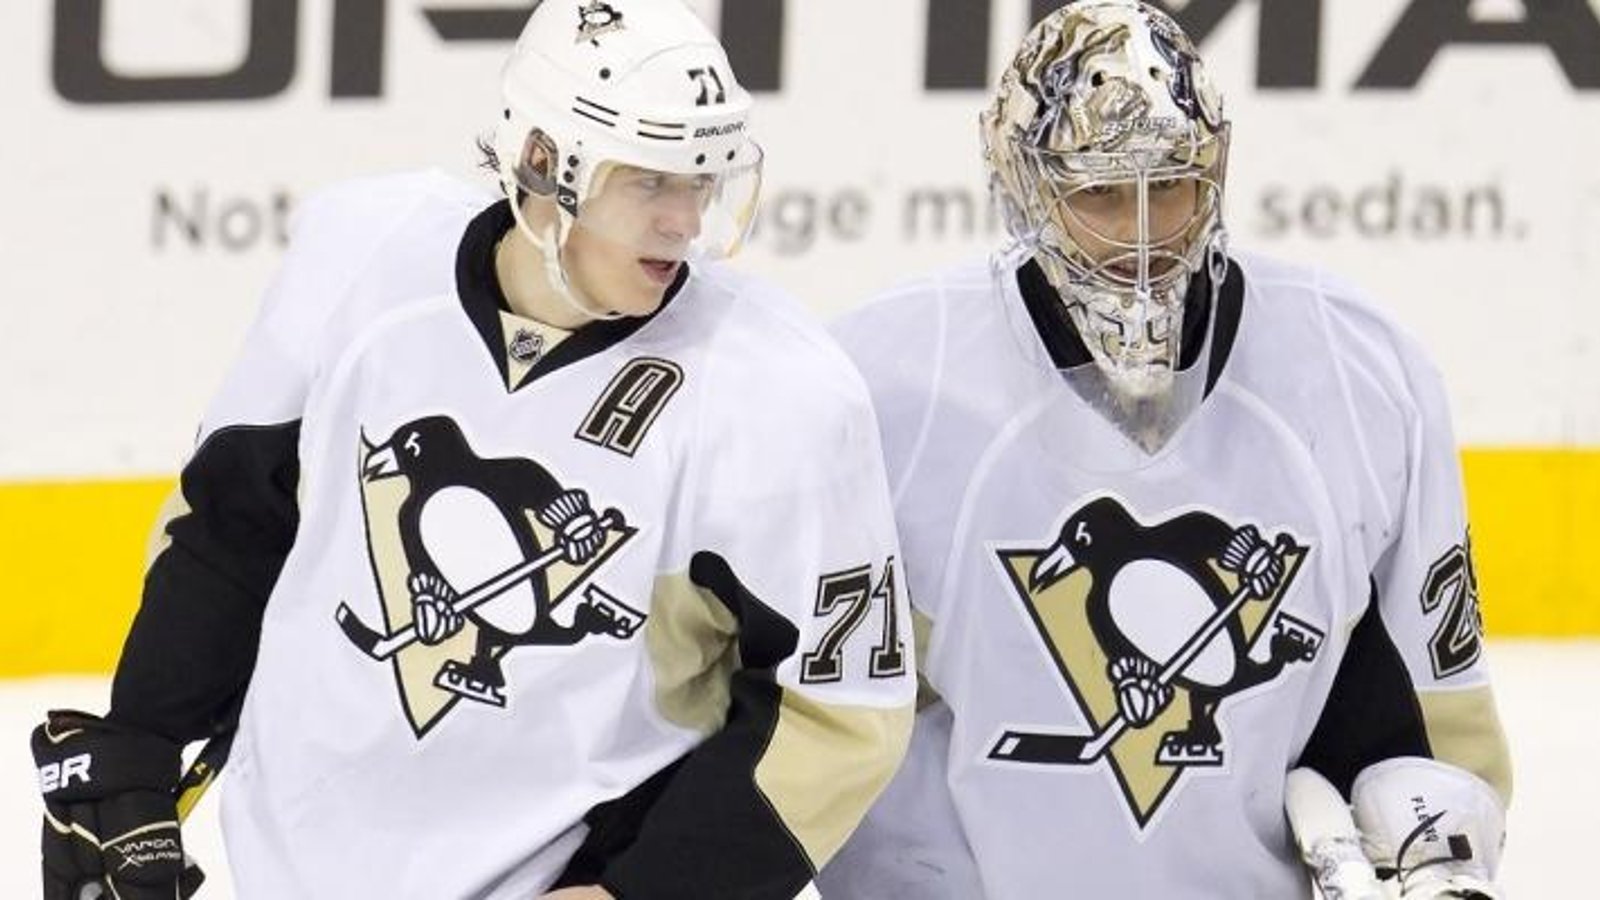 Two very promising signs for the Penguins.